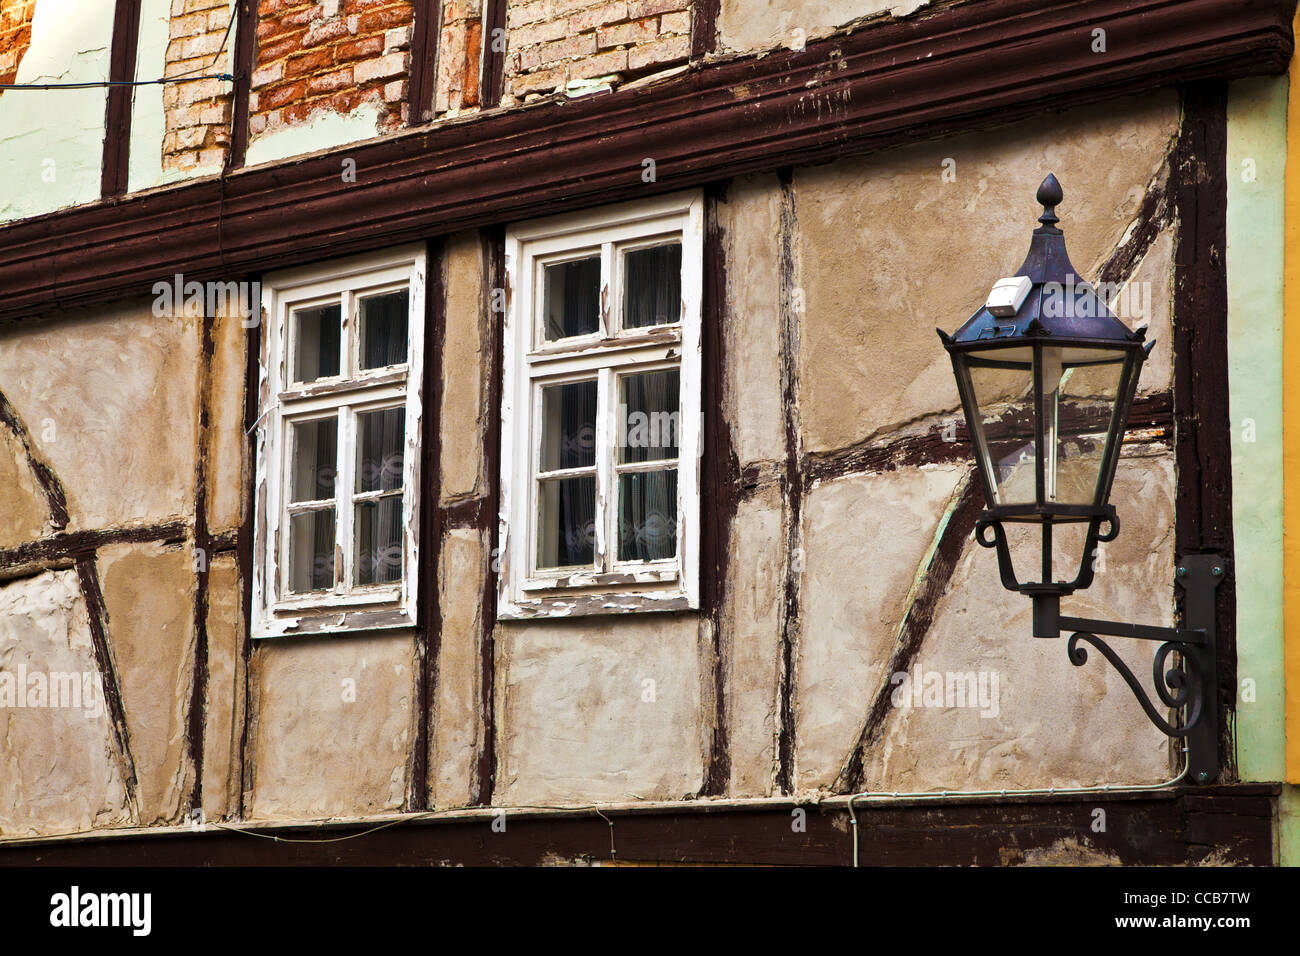 Old wooden windows on a dilapidated half-timbered house in the UNESCO German town of Quedlinburg in Saxony Anhalt, Germany Stock Photo